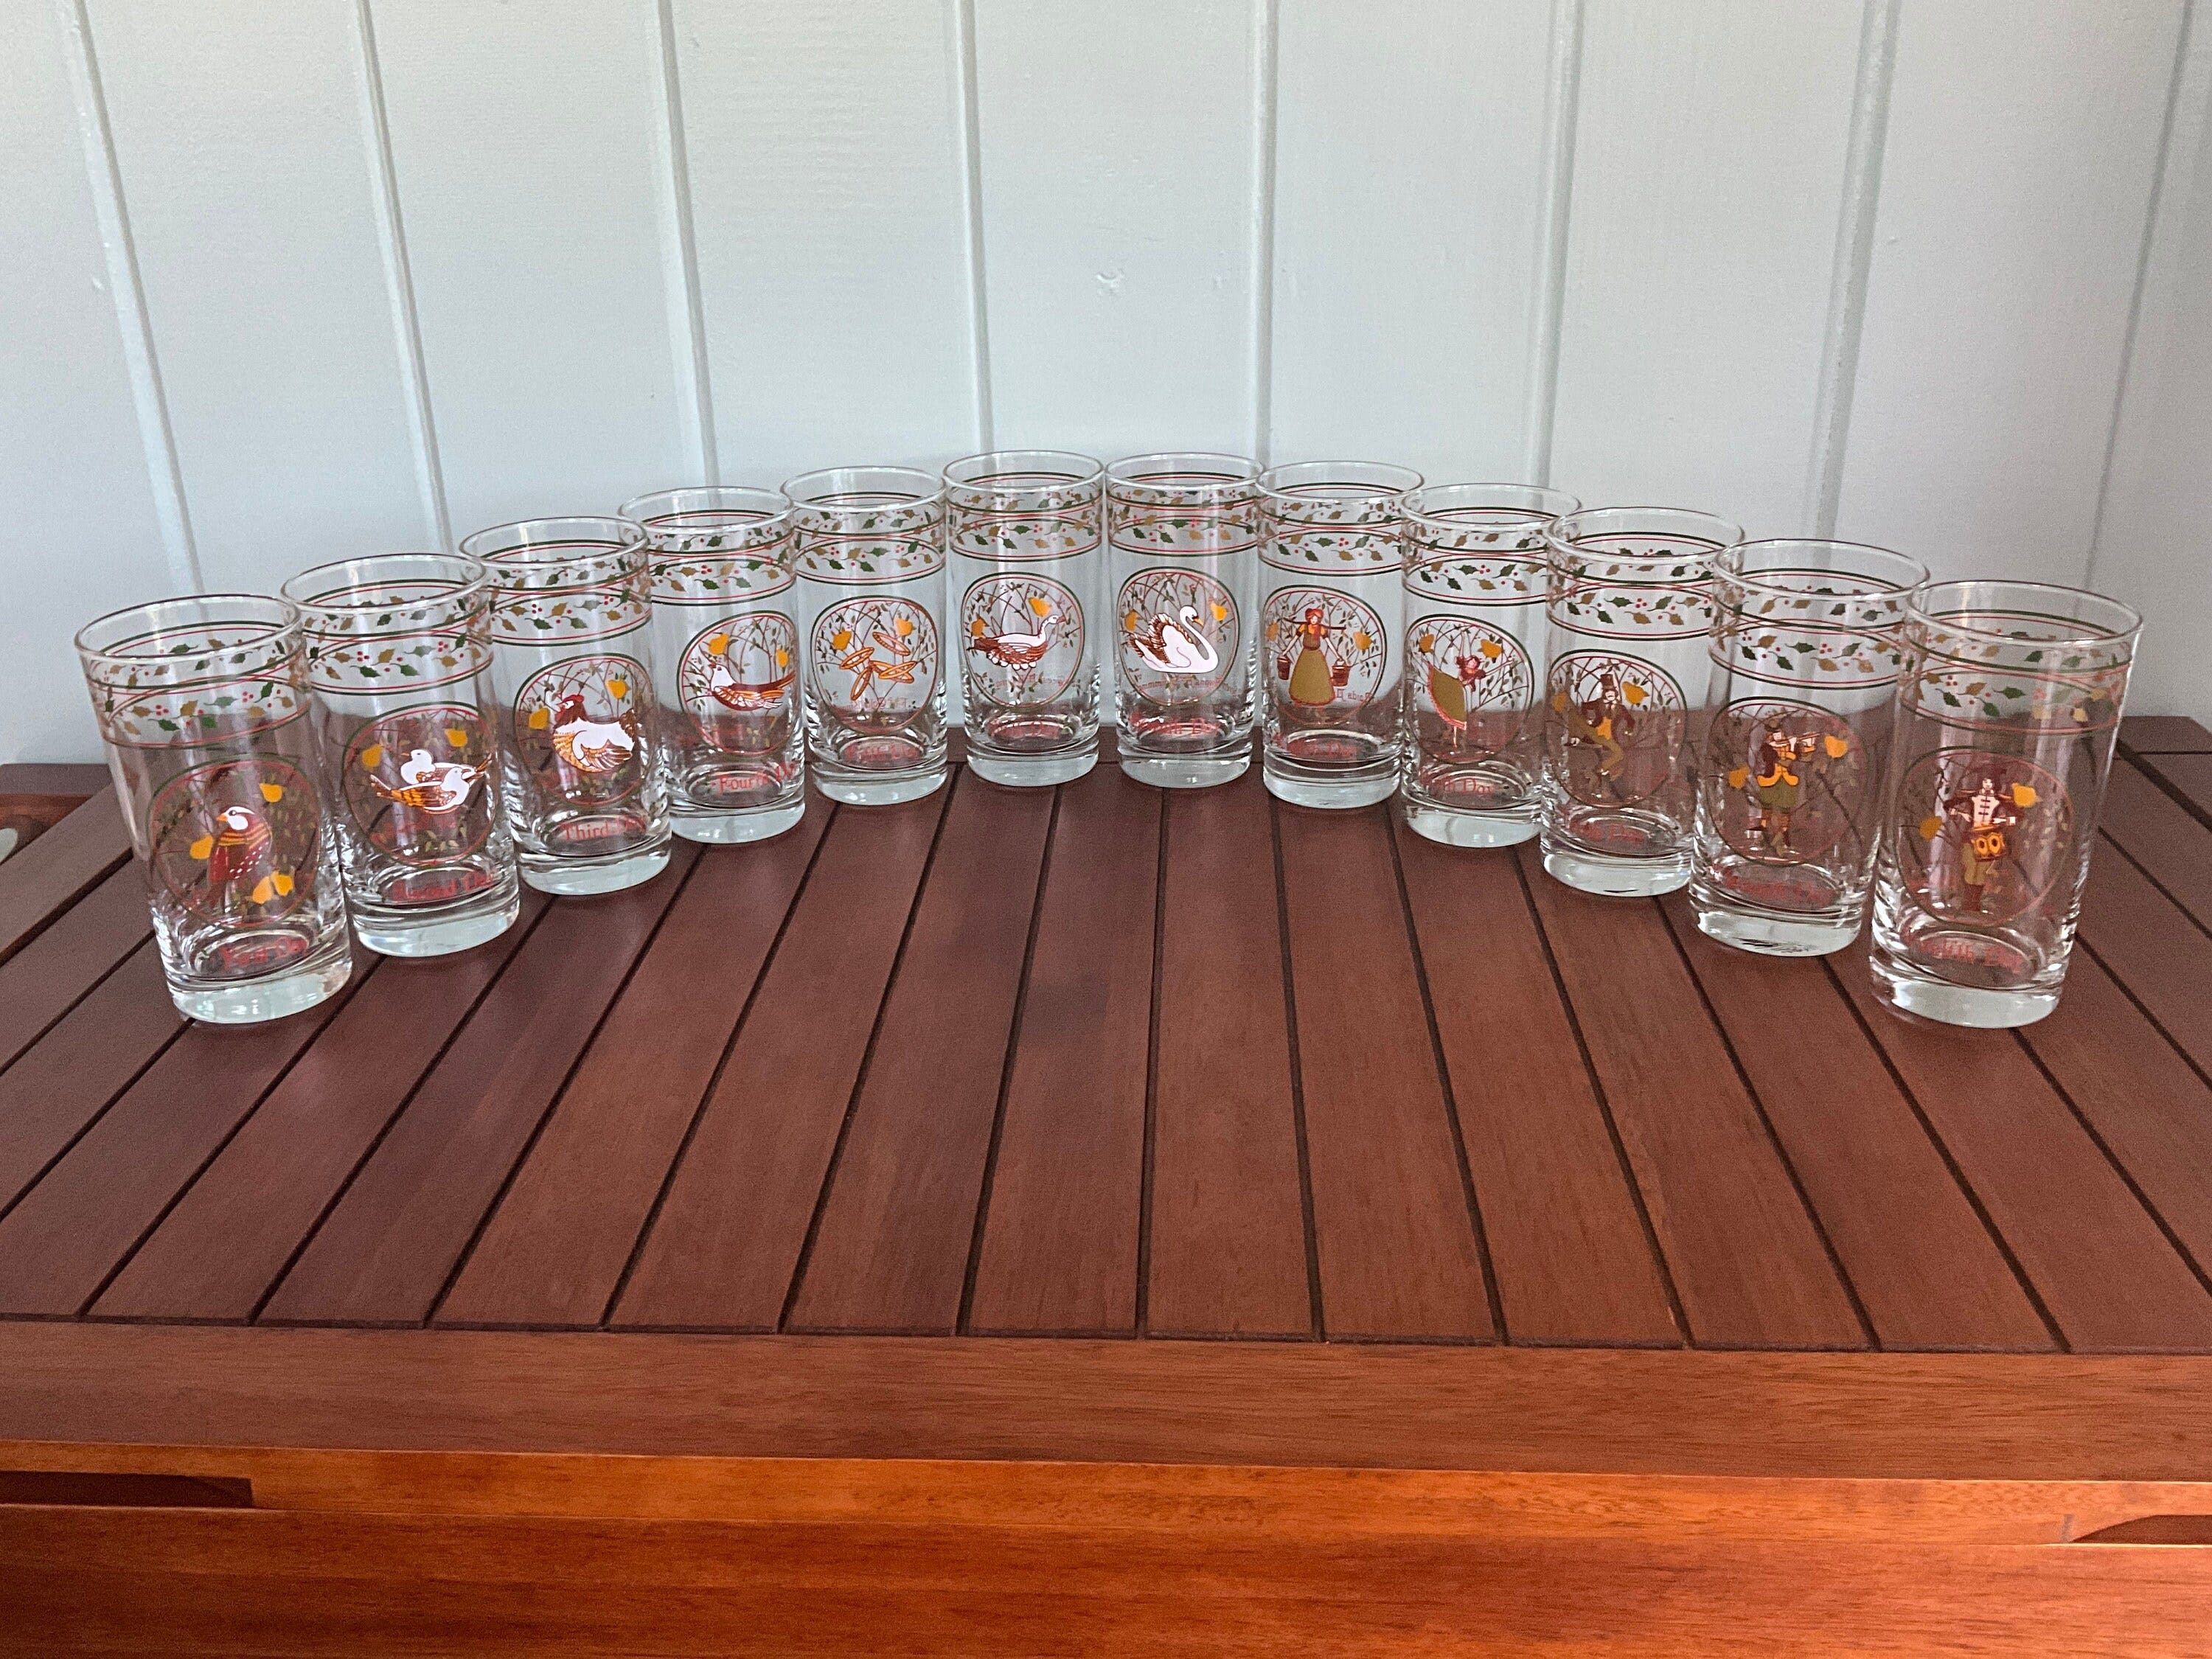 12 Days of Christmas Glasses by Anchor Hocking